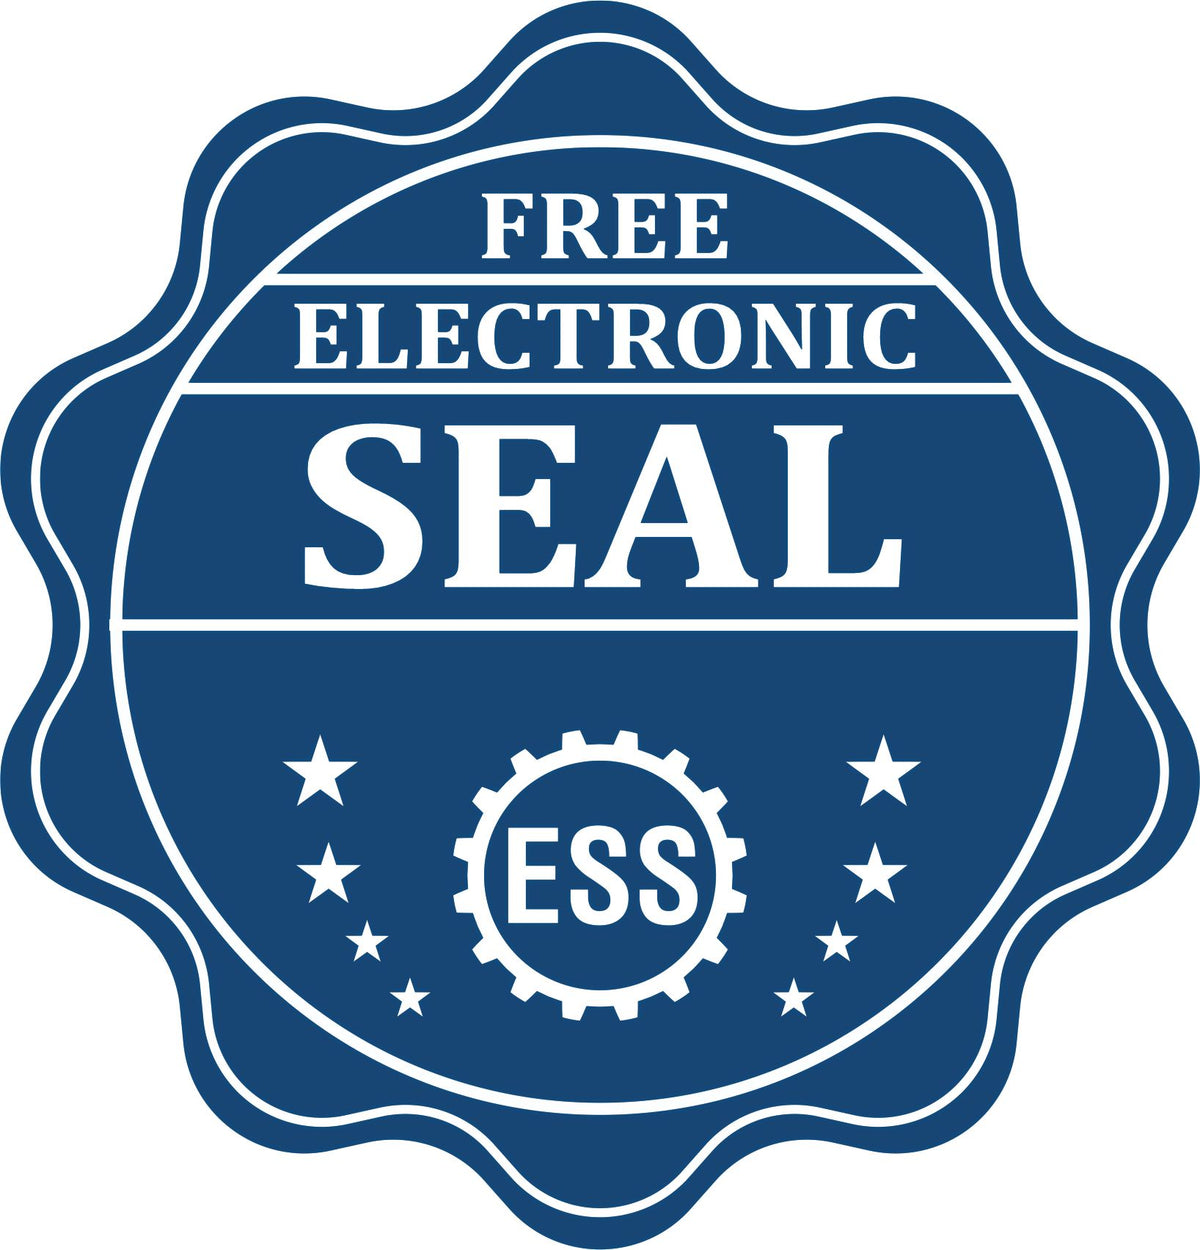 A badge showing a free electronic seal for the State of Tennessee Soft Land Surveyor Embossing Seal with stars and the ESS gear on the emblem.